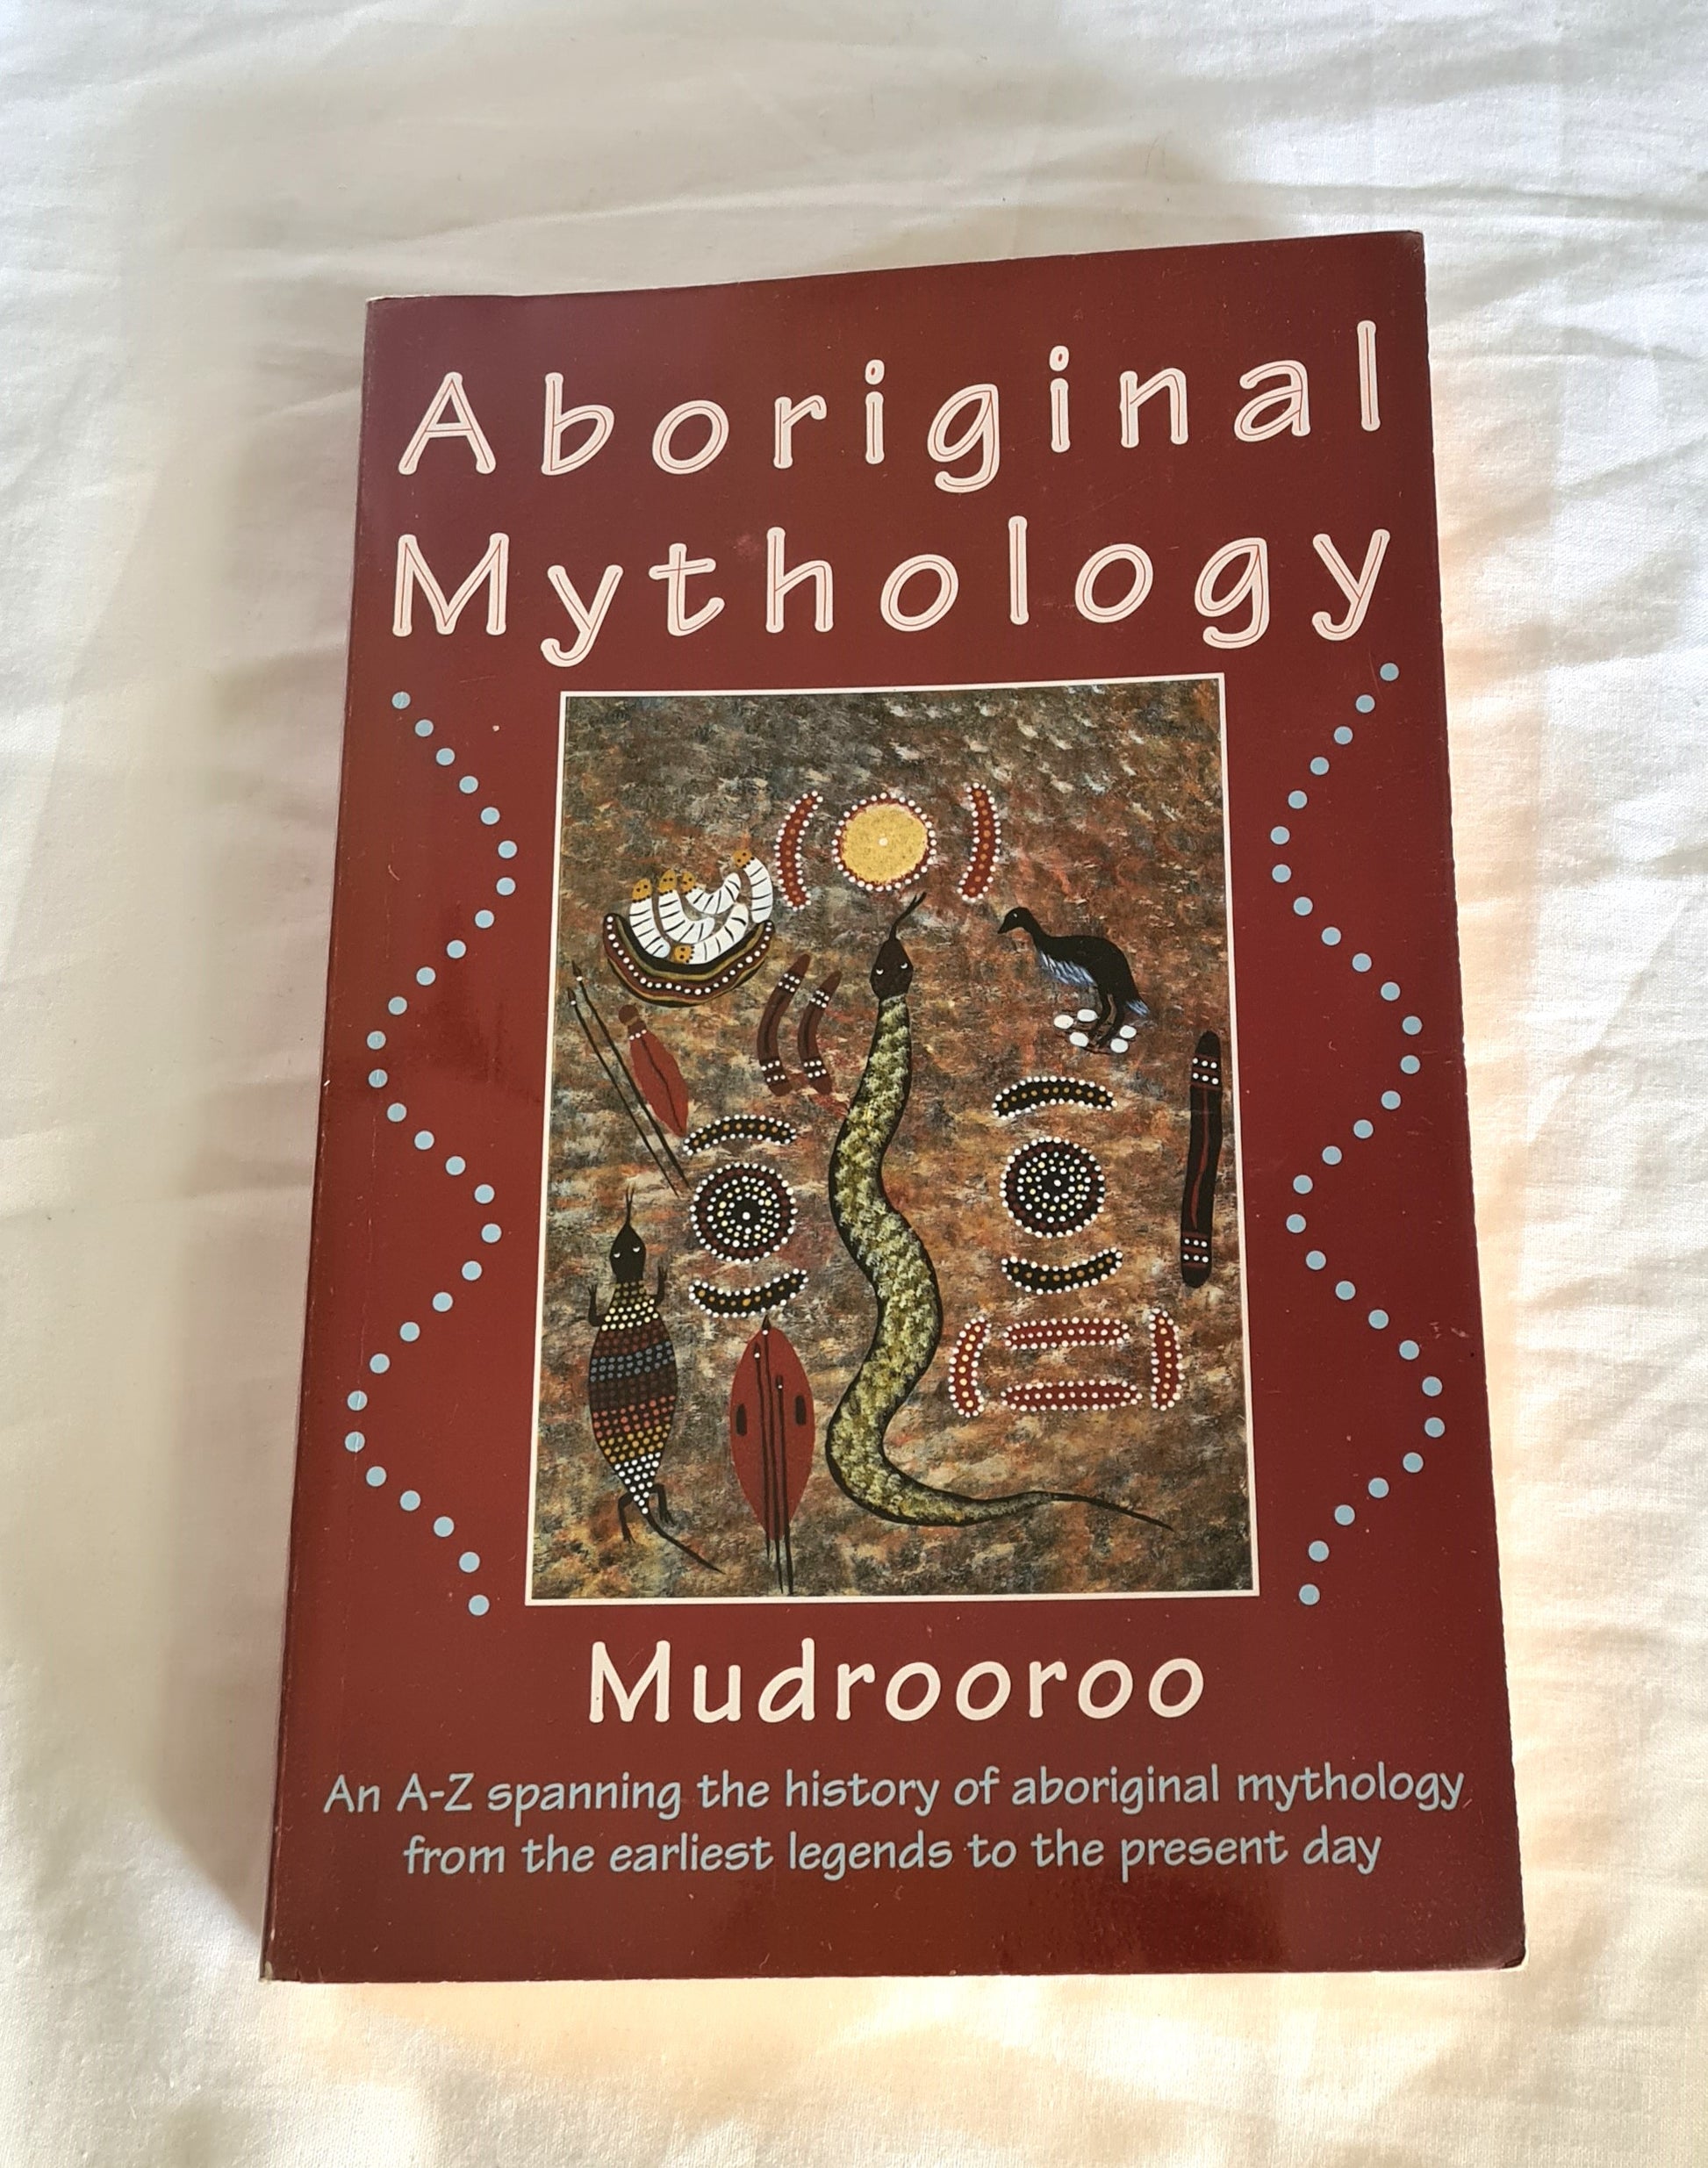 Aboriginal Mythology  An A-Z spanning the history of aboriginal mythology from the earliest legends to the present day  by Mudrooroo Nyoongah